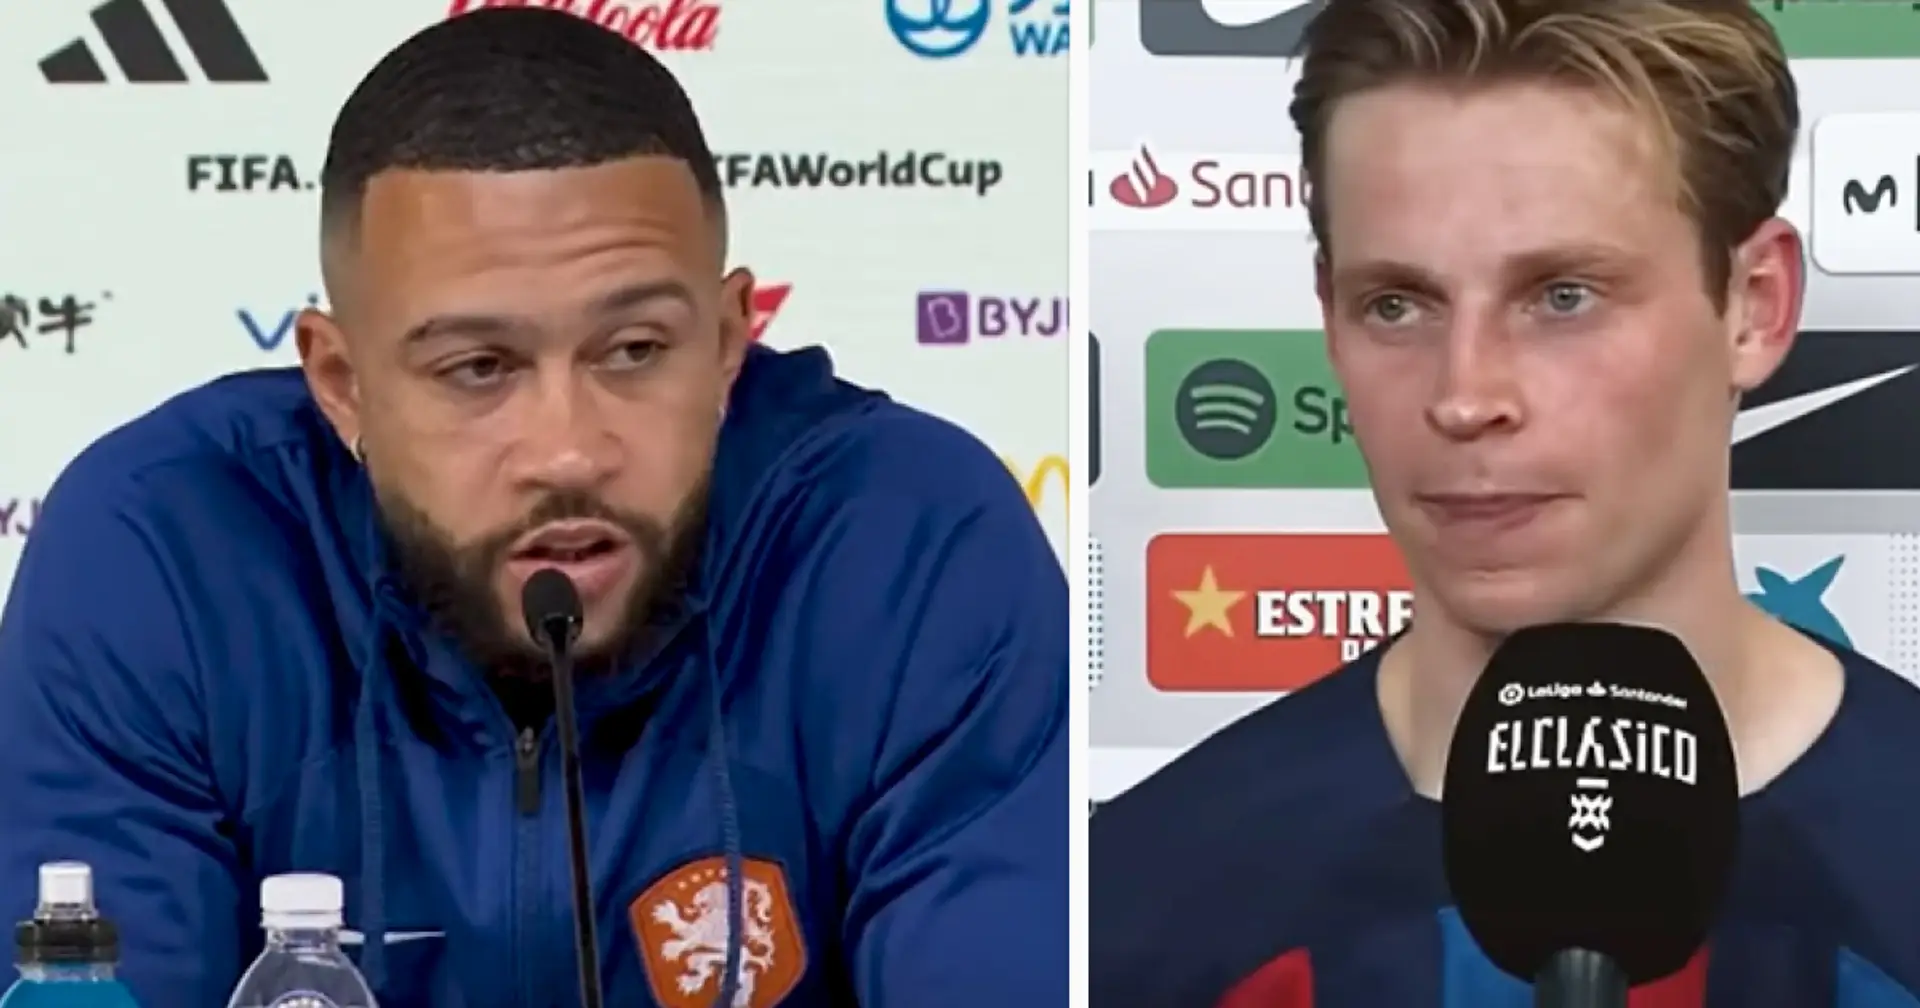 'It's annoying': Depay all but accuses Frenkie De Jong of faking injury to miss NT call-up